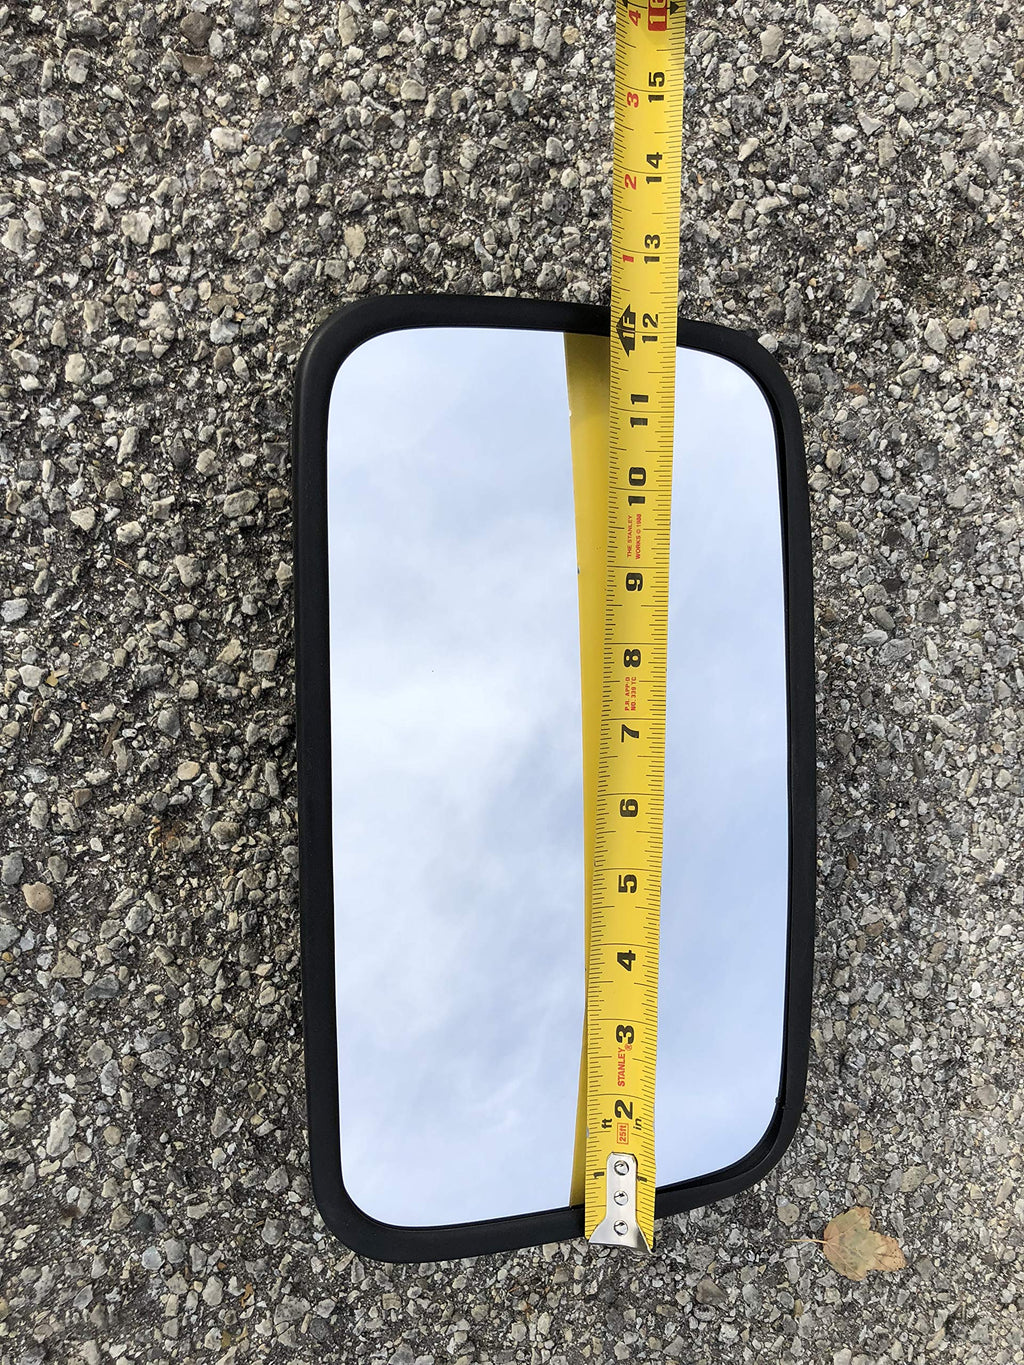 Replacement 7" x 12" tractor mirror for lines such as John Deere, Case IH, Challenger, Agco, New Holland, Massery Ferguson, and Versatile by Maverick Advantage - LeoForward Australia